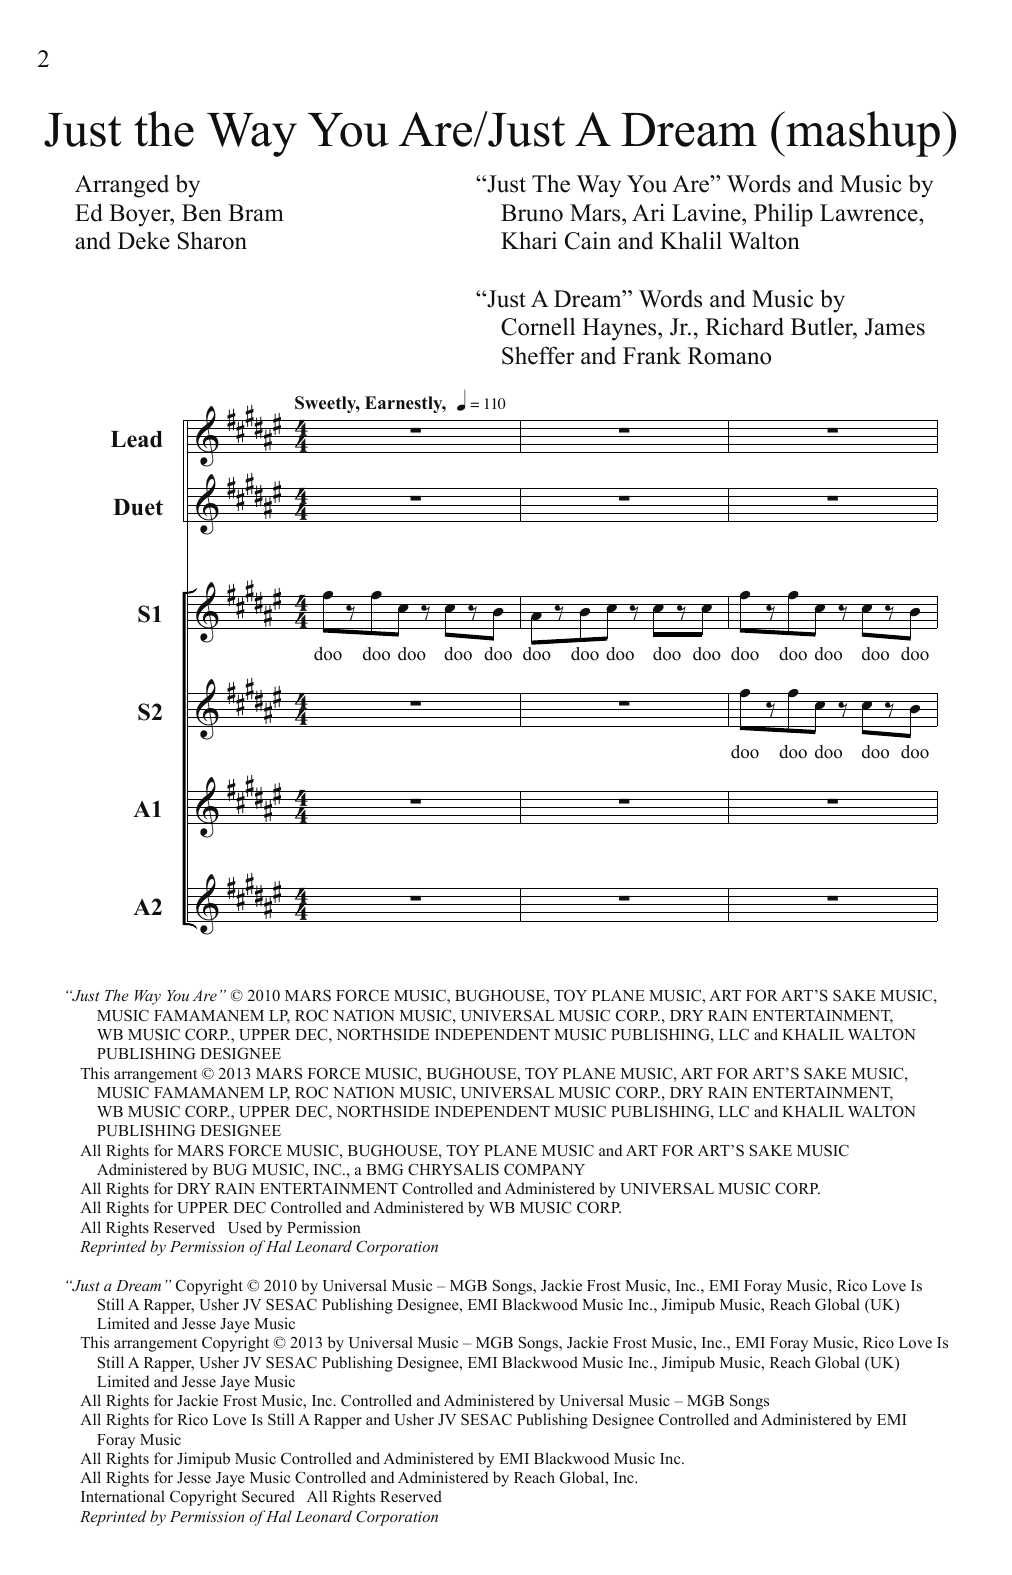 Download Pitch Perfect (Movie) Just The Way You Are/Just A Dream (Mash Sheet Music